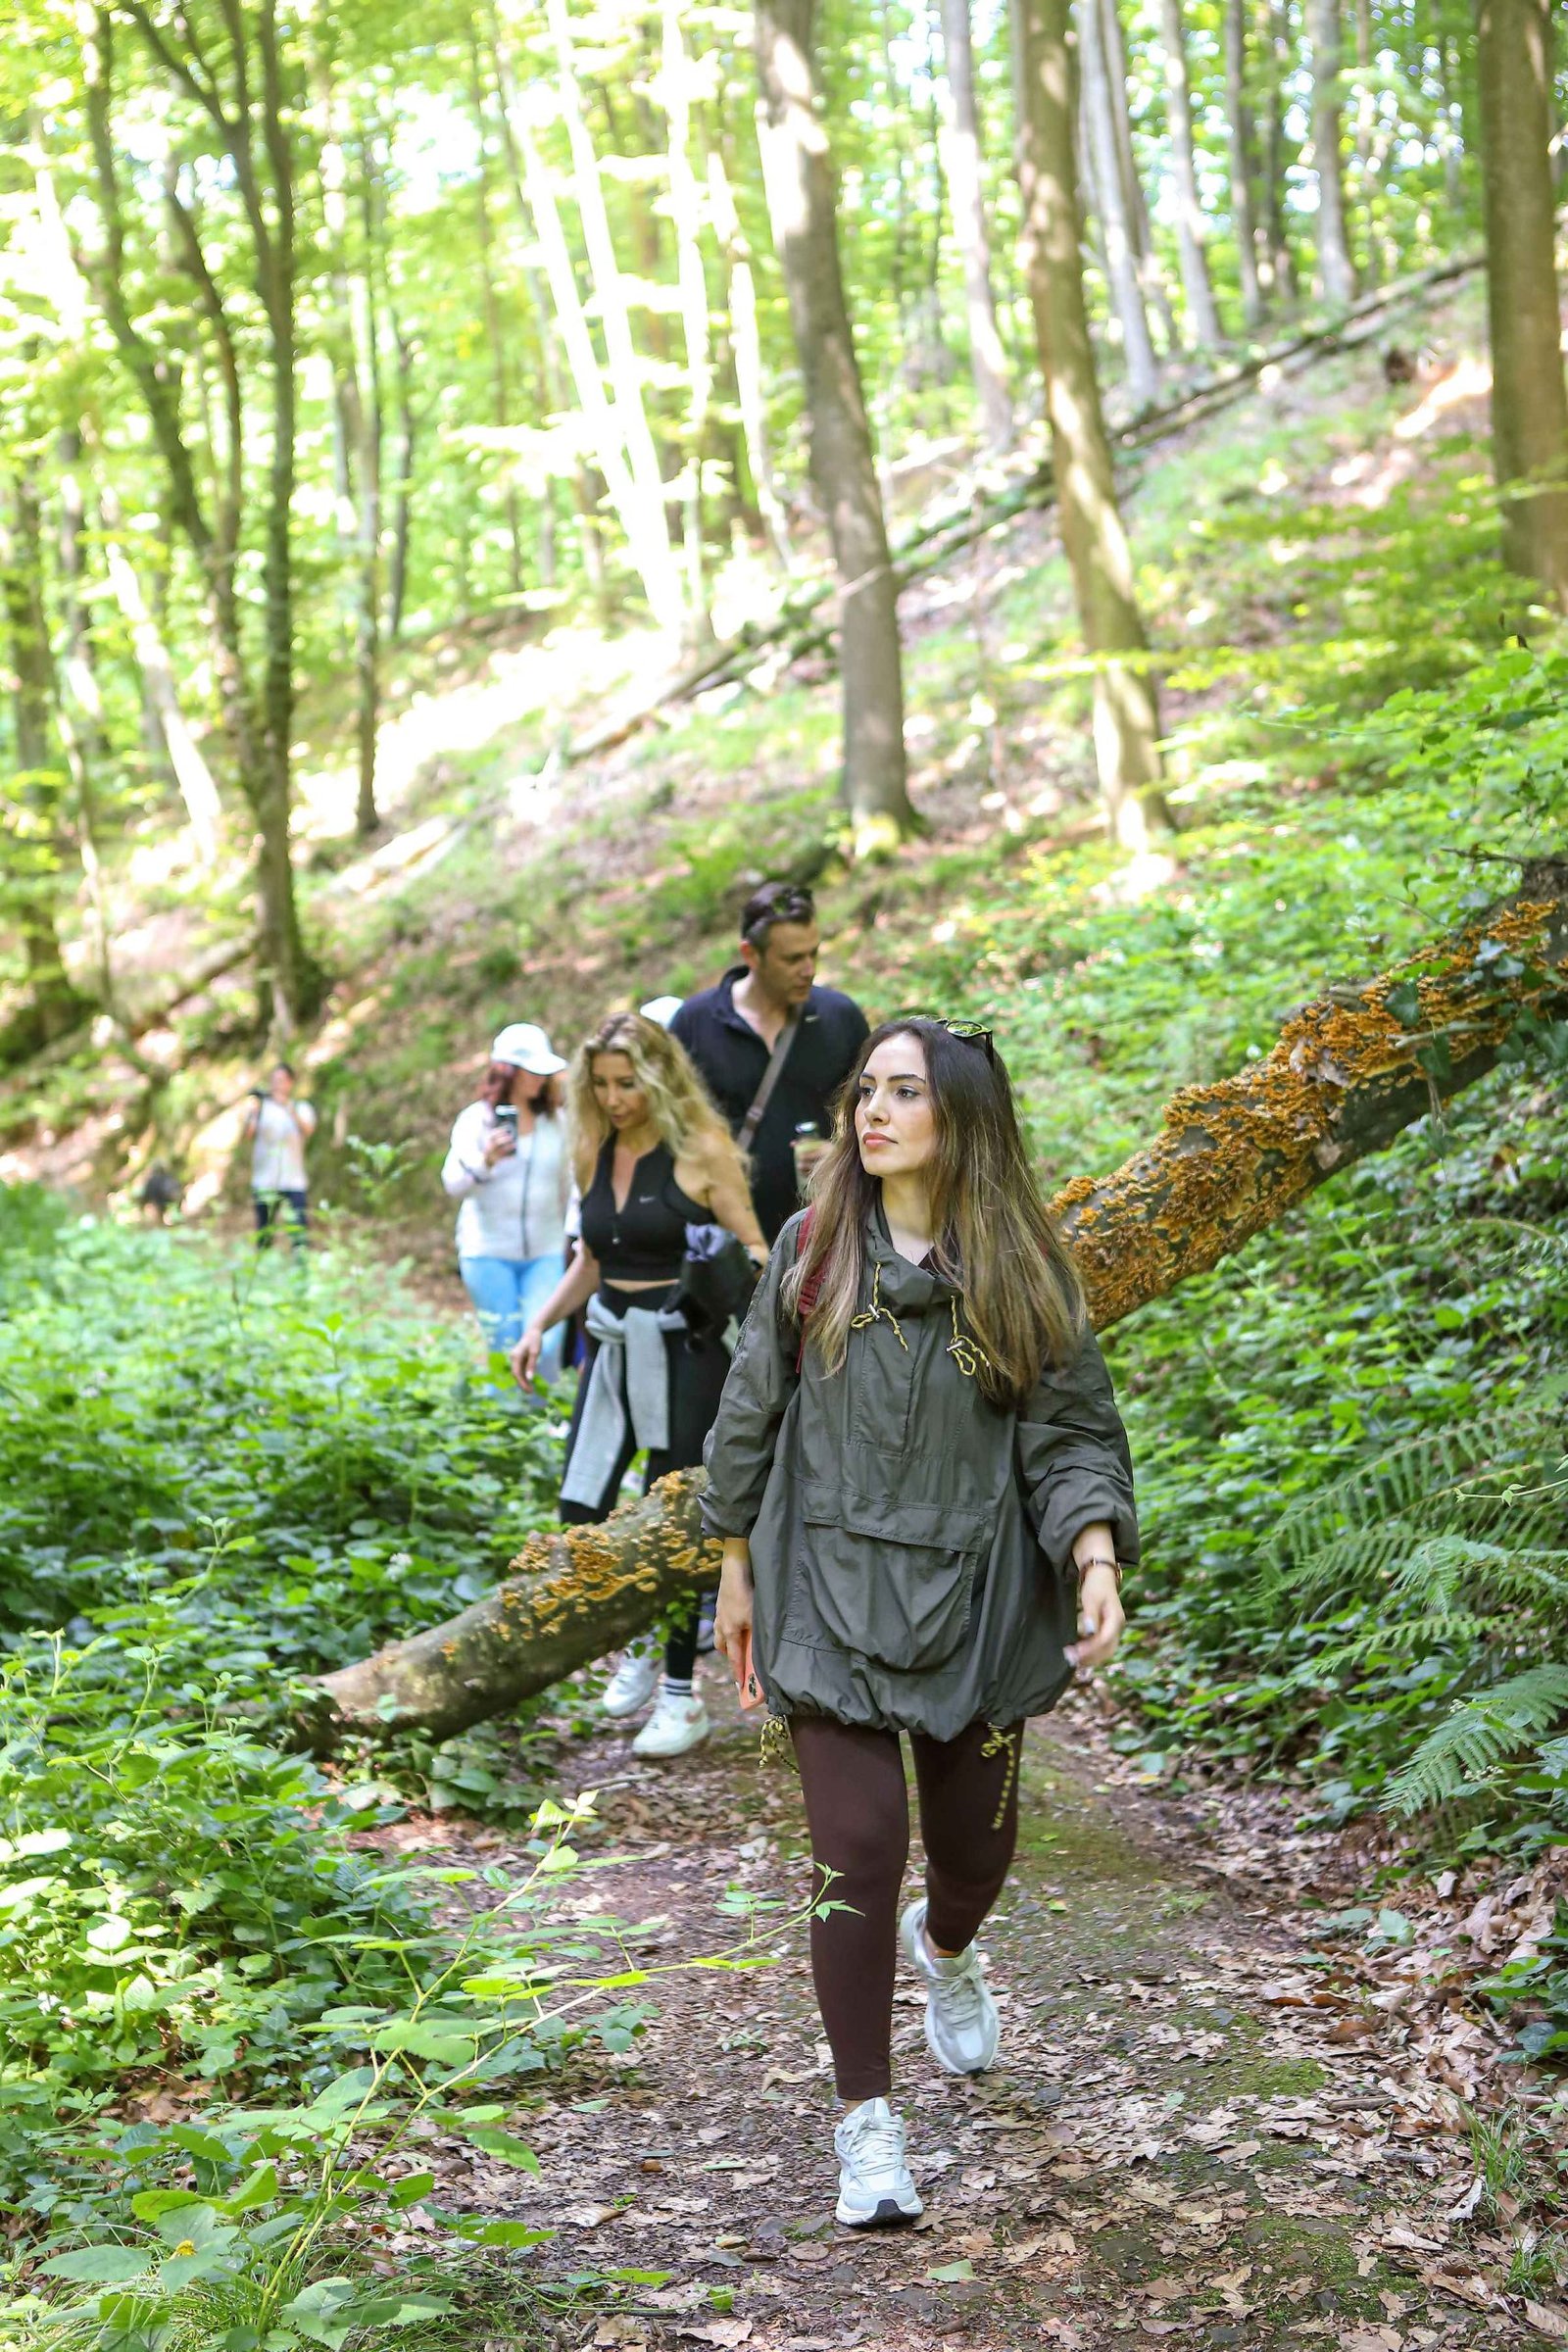 Ayşe Tolga Forest Therapy Seamlesstance Nature Experience (2)